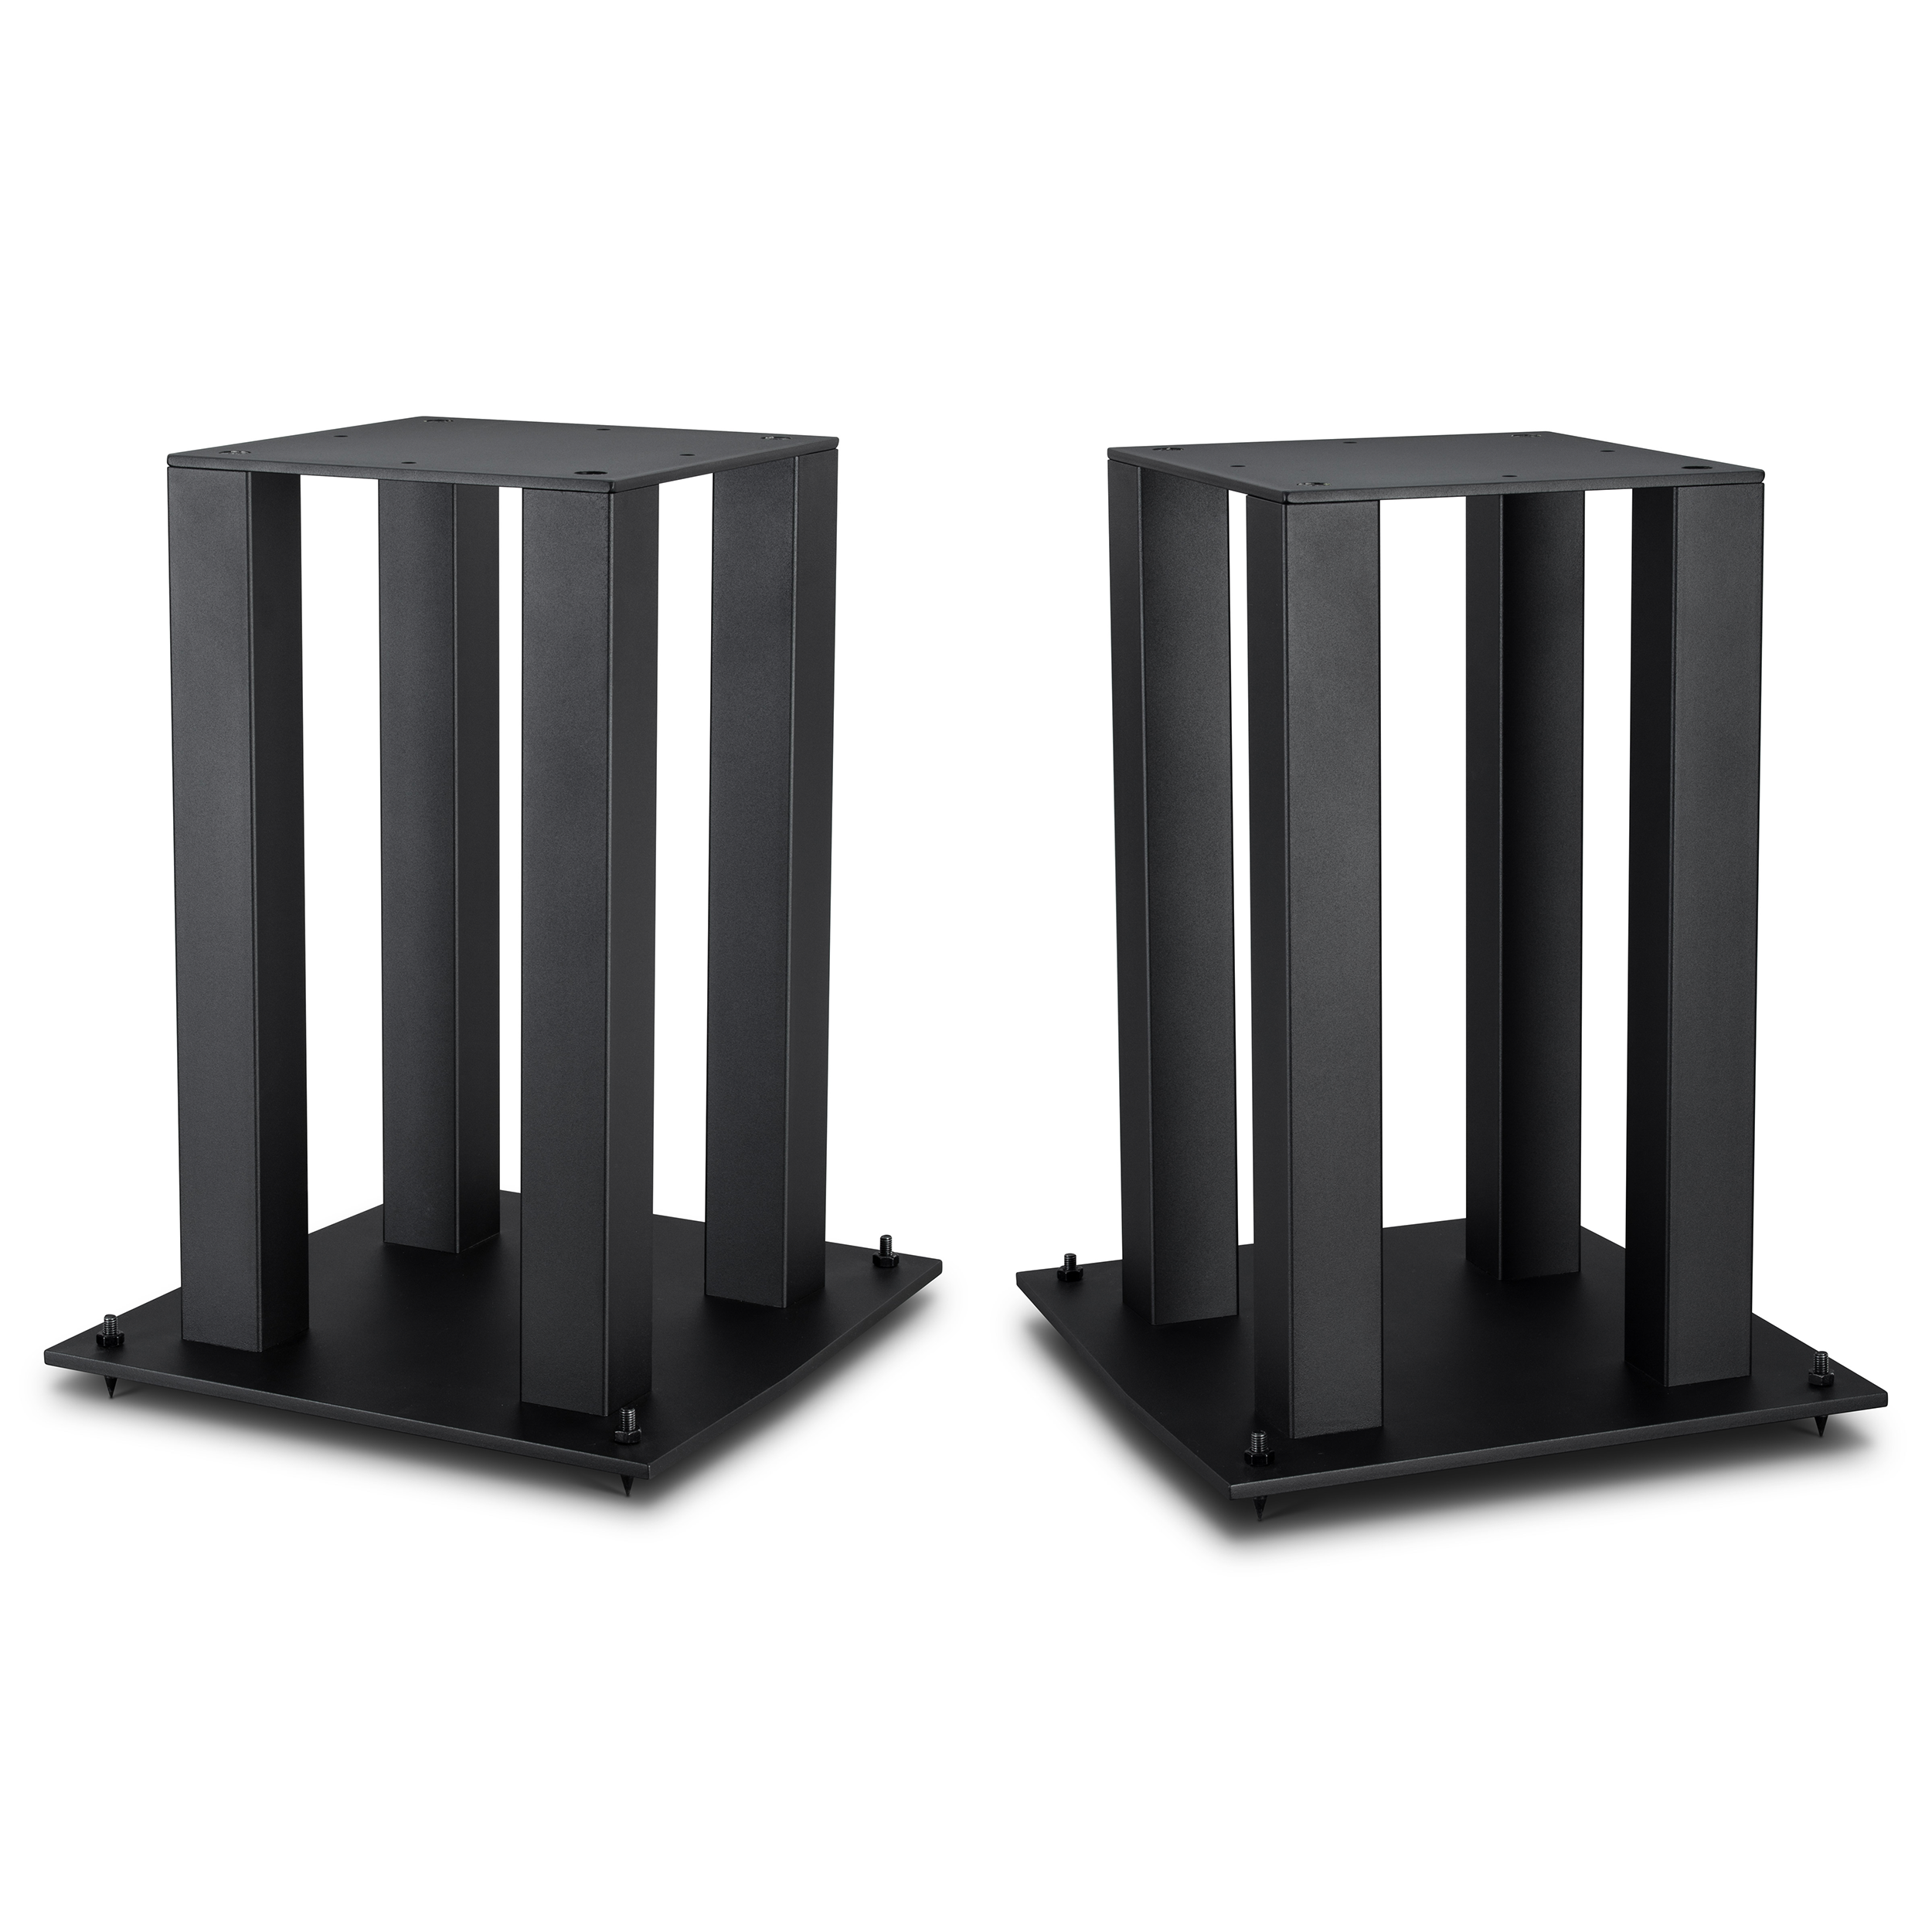 MoFi Electronics SourcePoint 10 Speaker Stands [Pair]